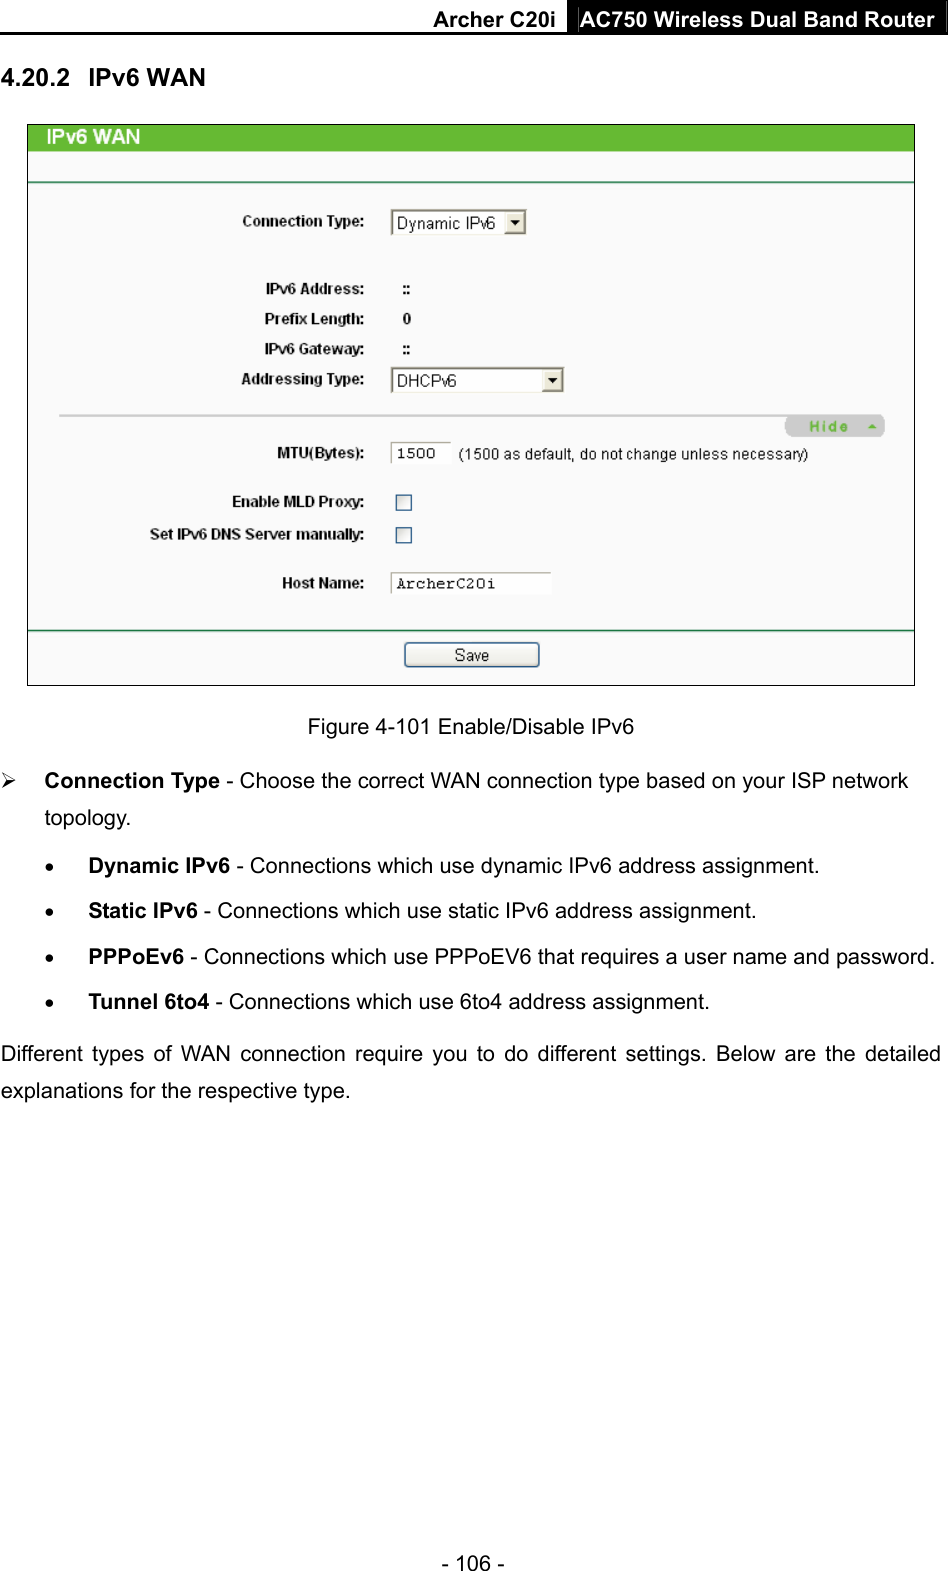 Archer C20i AC750 Wireless Dual Band Router - 106 - 4.20.2  IPv6 WAN  Figure 4-101 Enable/Disable IPv6 ¾ Connection Type - Choose the correct WAN connection type based on your ISP network topology. • Dynamic IPv6 - Connections which use dynamic IPv6 address assignment.   • Static IPv6 - Connections which use static IPv6 address assignment.   • PPPoEv6 - Connections which use PPPoEV6 that requires a user name and password.   • Tunnel 6to4 - Connections which use 6to4 address assignment. Different types of WAN connection require you to do different settings. Below are the detailed explanations for the respective type. 